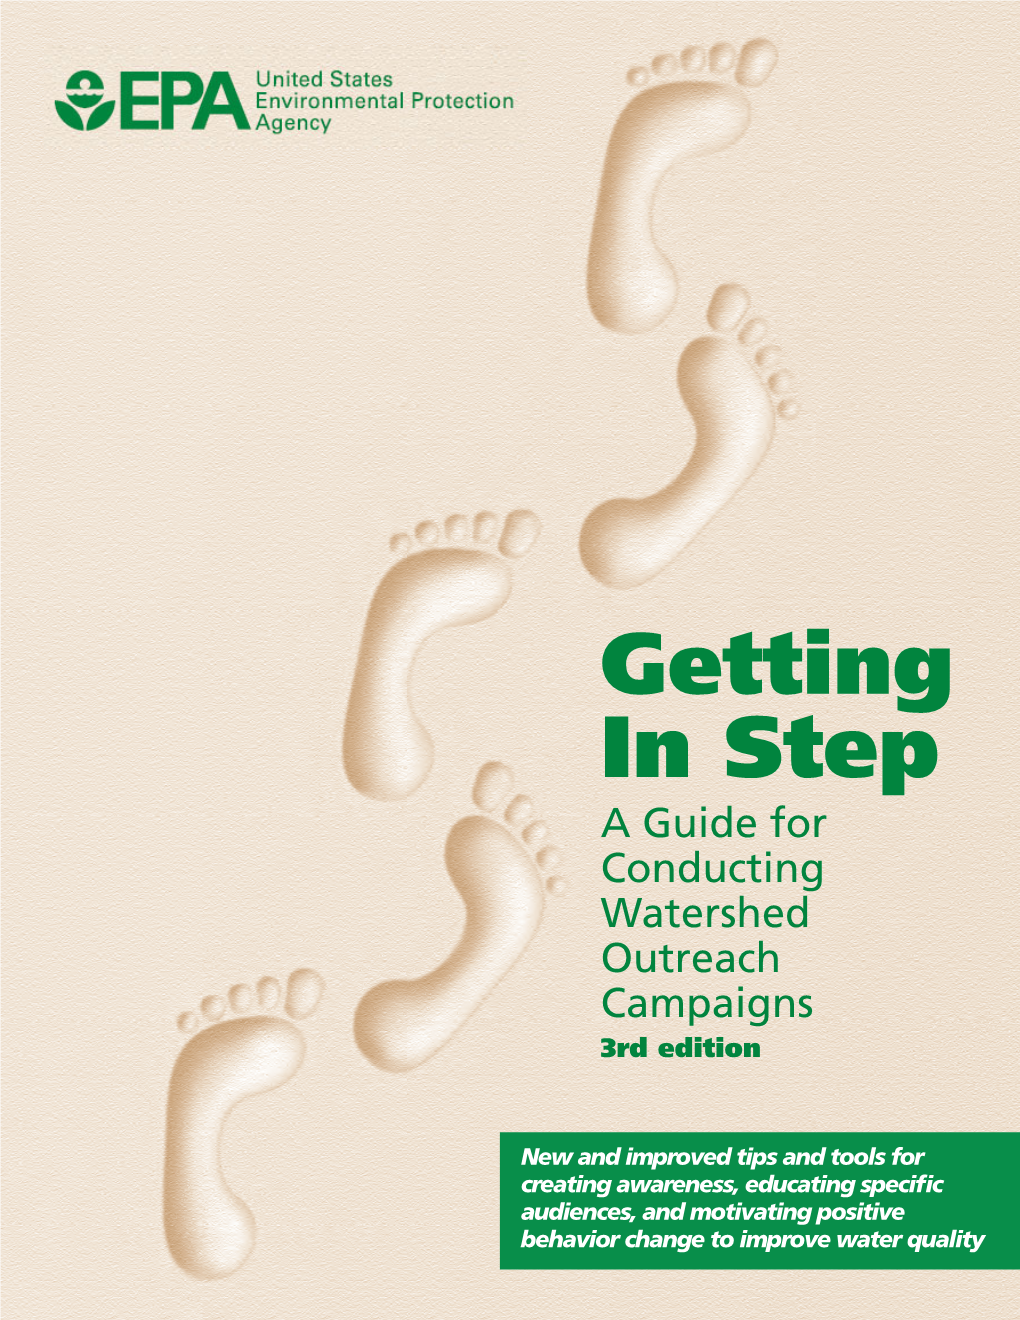 Getting in Step Guide for Conducting Watershed Outreach Campaigns